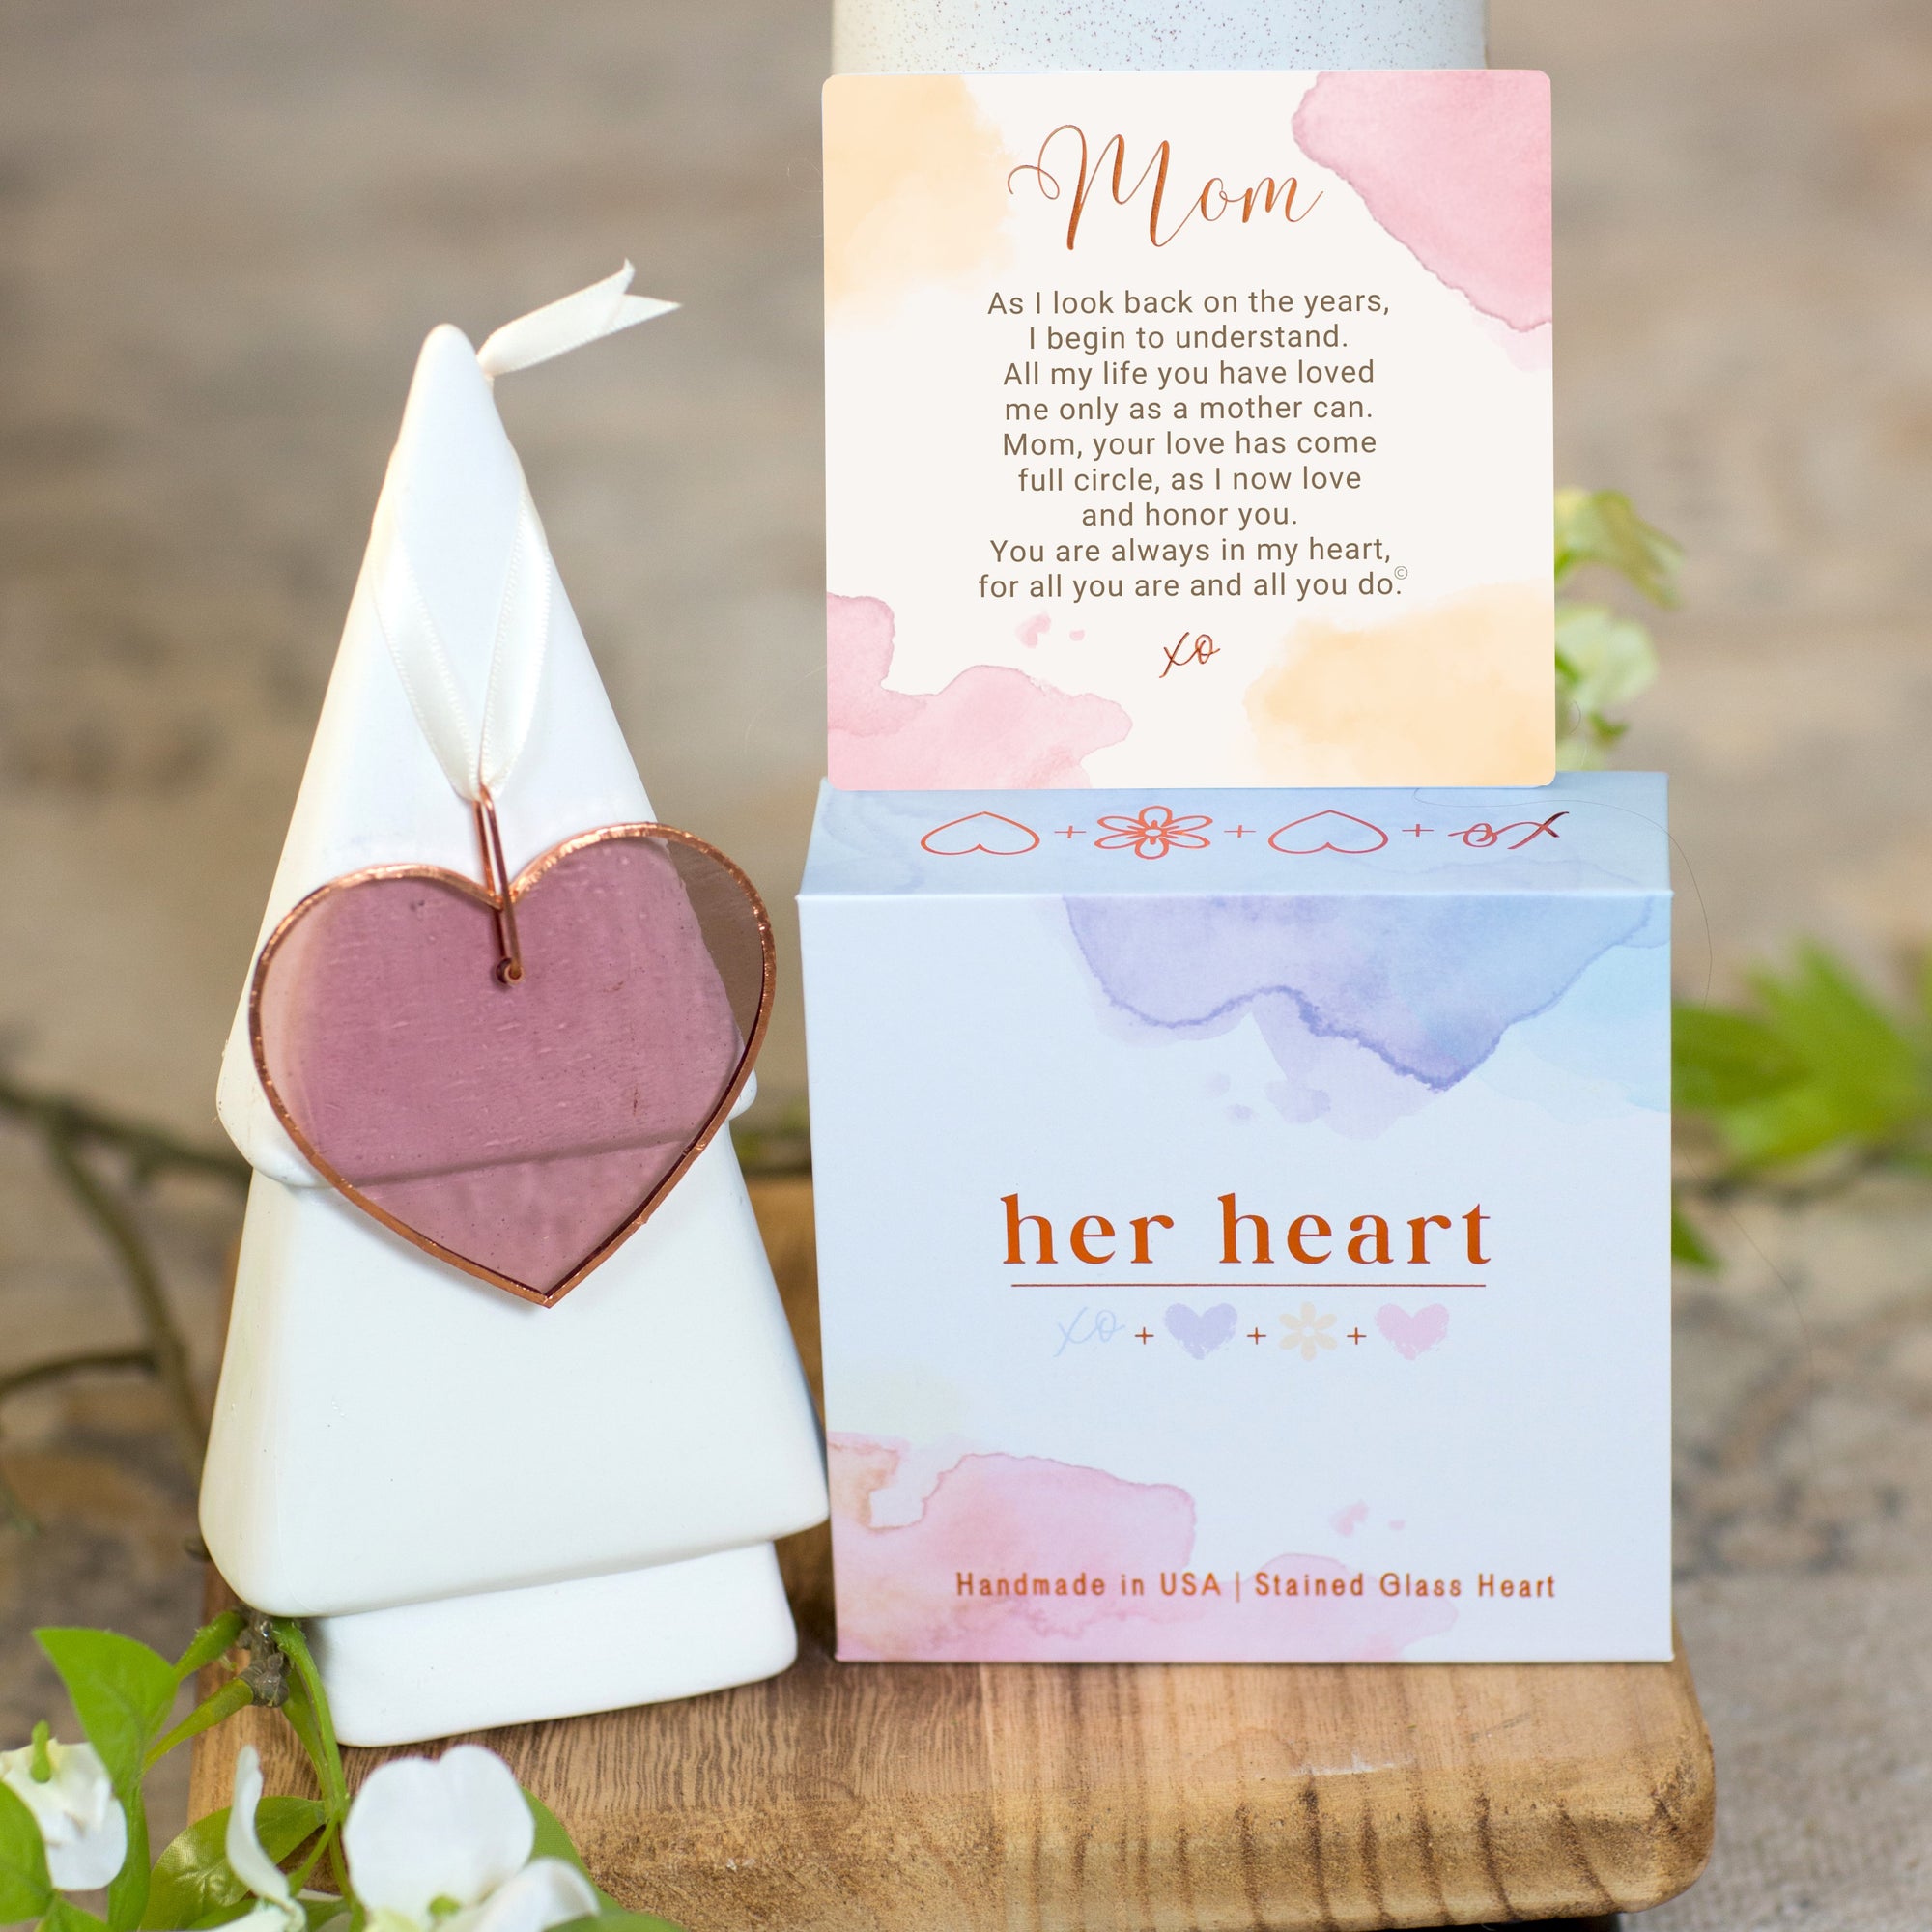 Her Heart for Mom gift with box, sentiment card, and pink stain glass heart.